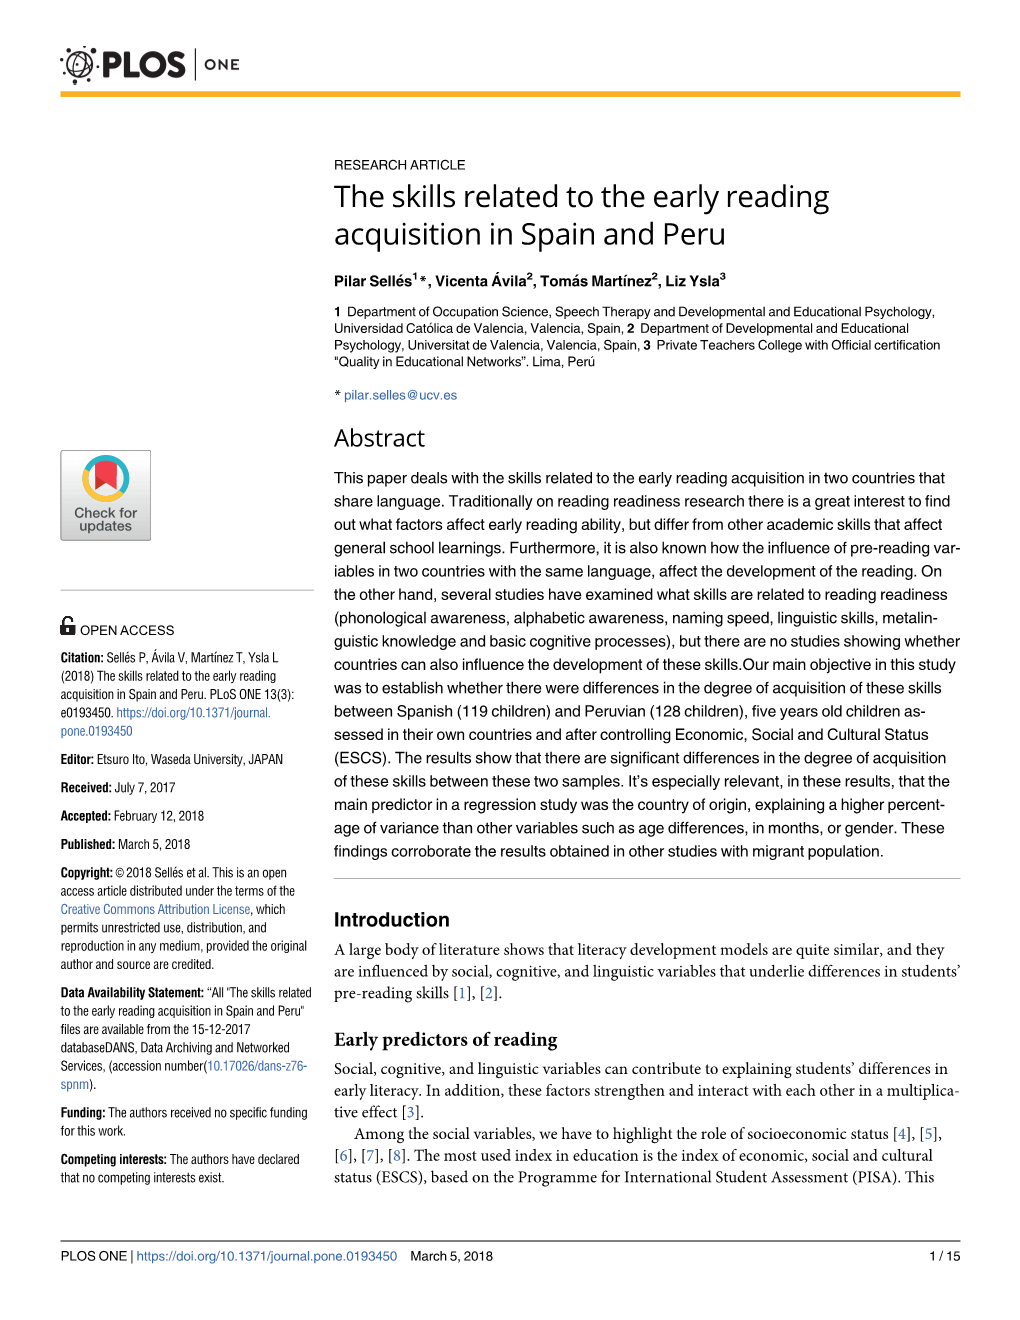 The Skills Related to the Early Reading Acquisition in Spain and Peru